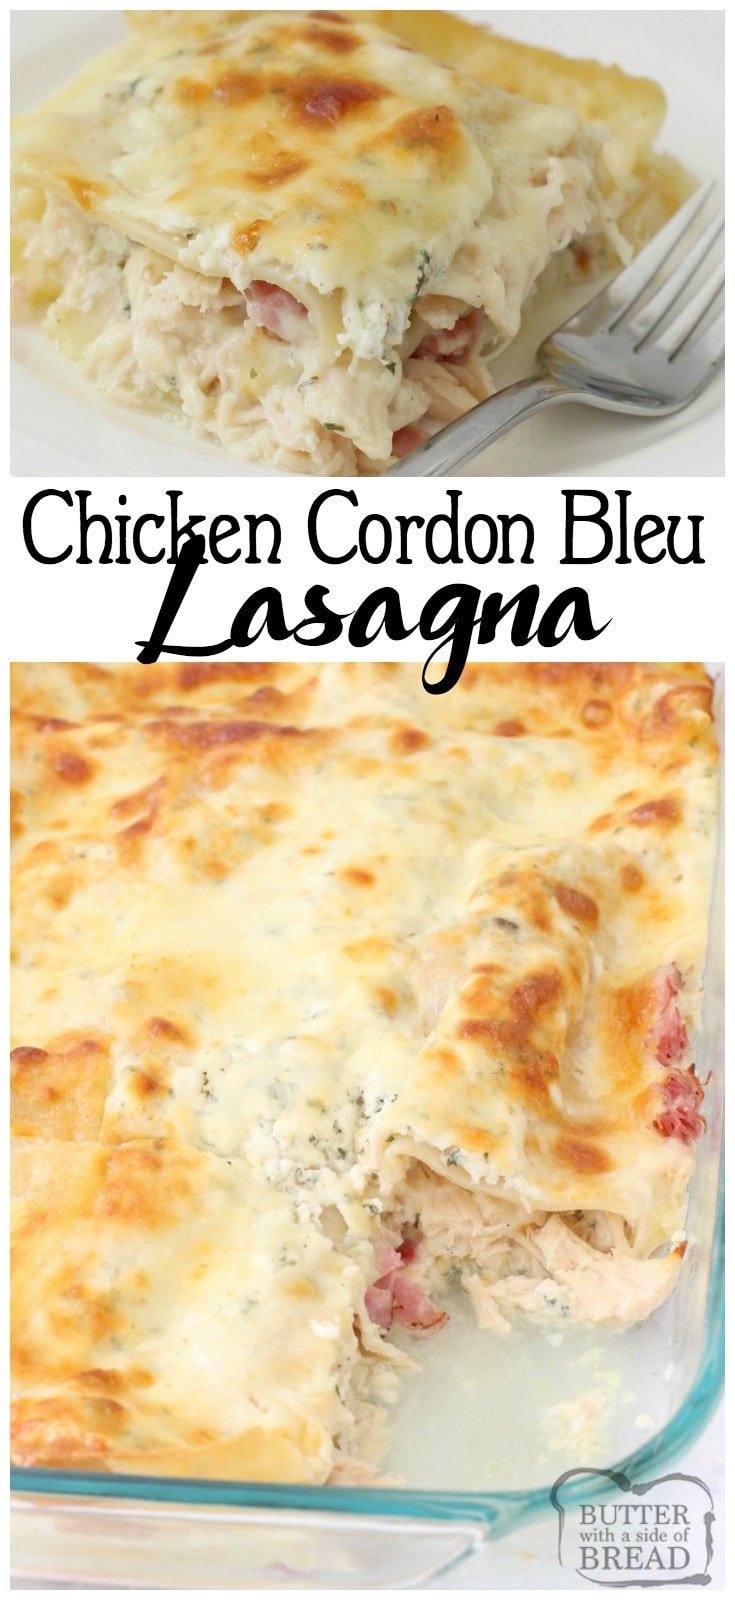 Chicken Cordon Bleu Lasagna made with juicy chicken & ham combined with noodles & four cheeses to make this creamy, flavorful #lasagna #recipe from Butter With A Side of Bread